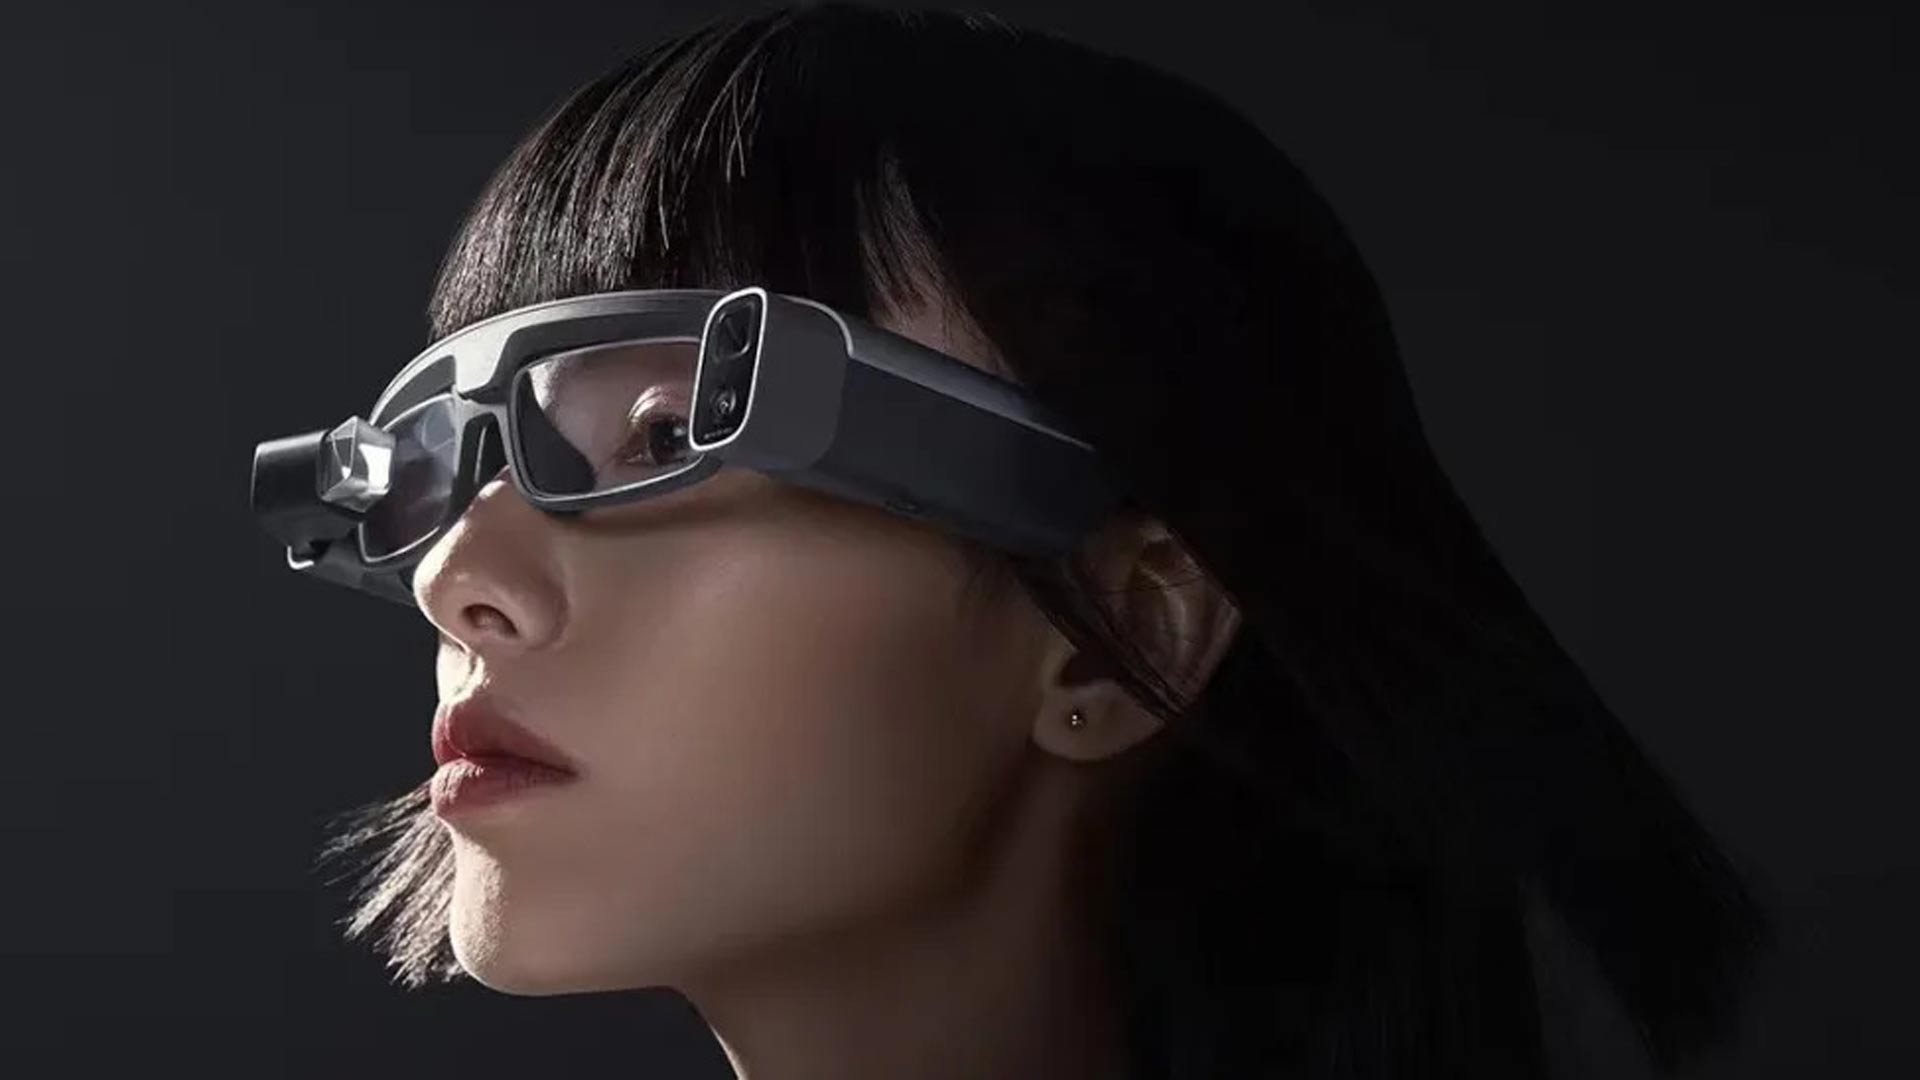 Xiaomi shows off smart glasses with an all-green microLED